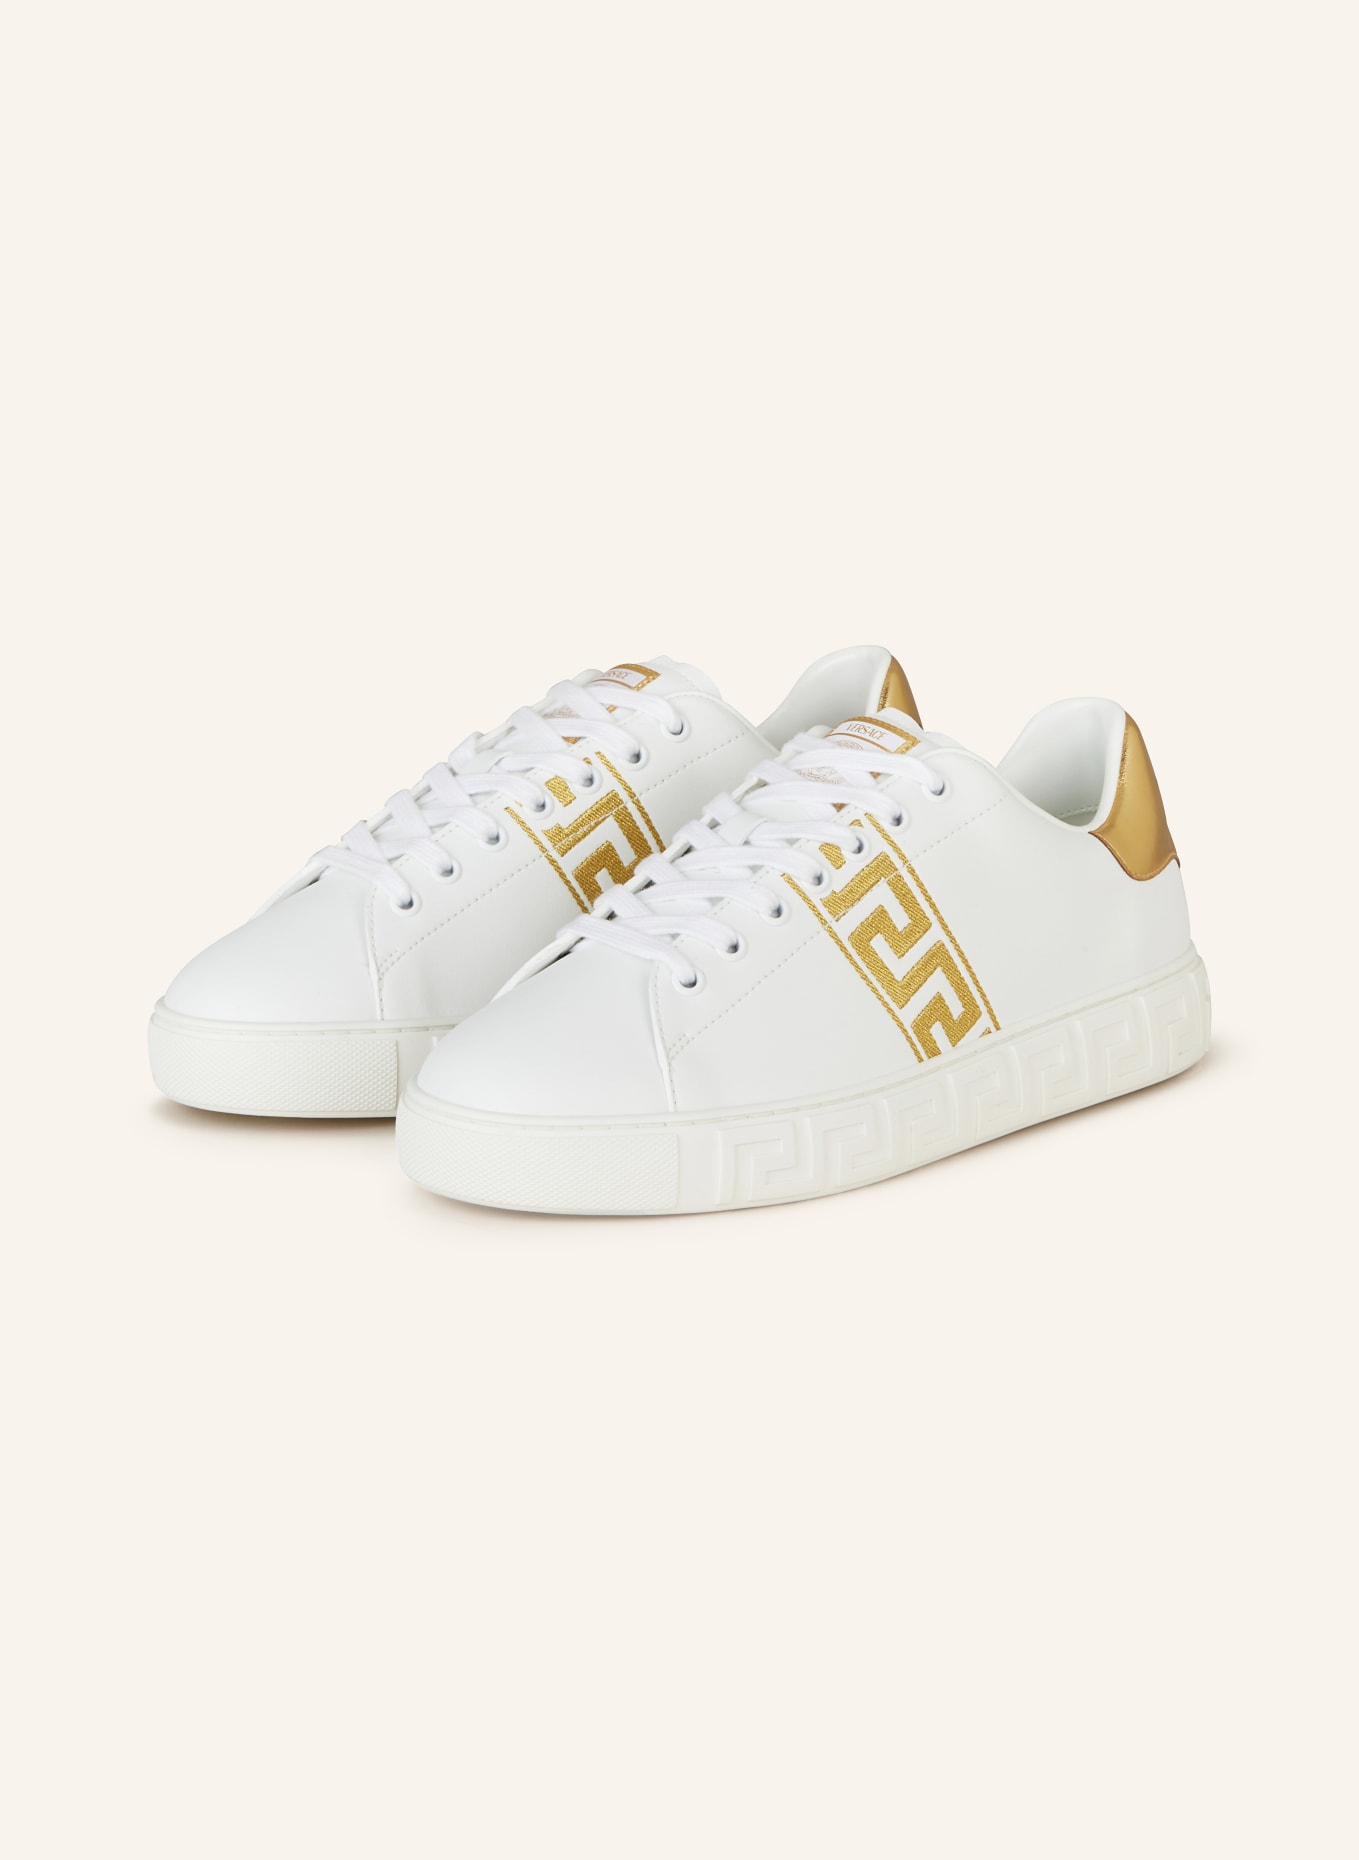 Versace Jeans Couture Fondo Dynamic White/Gold | Low-Top Sneaker